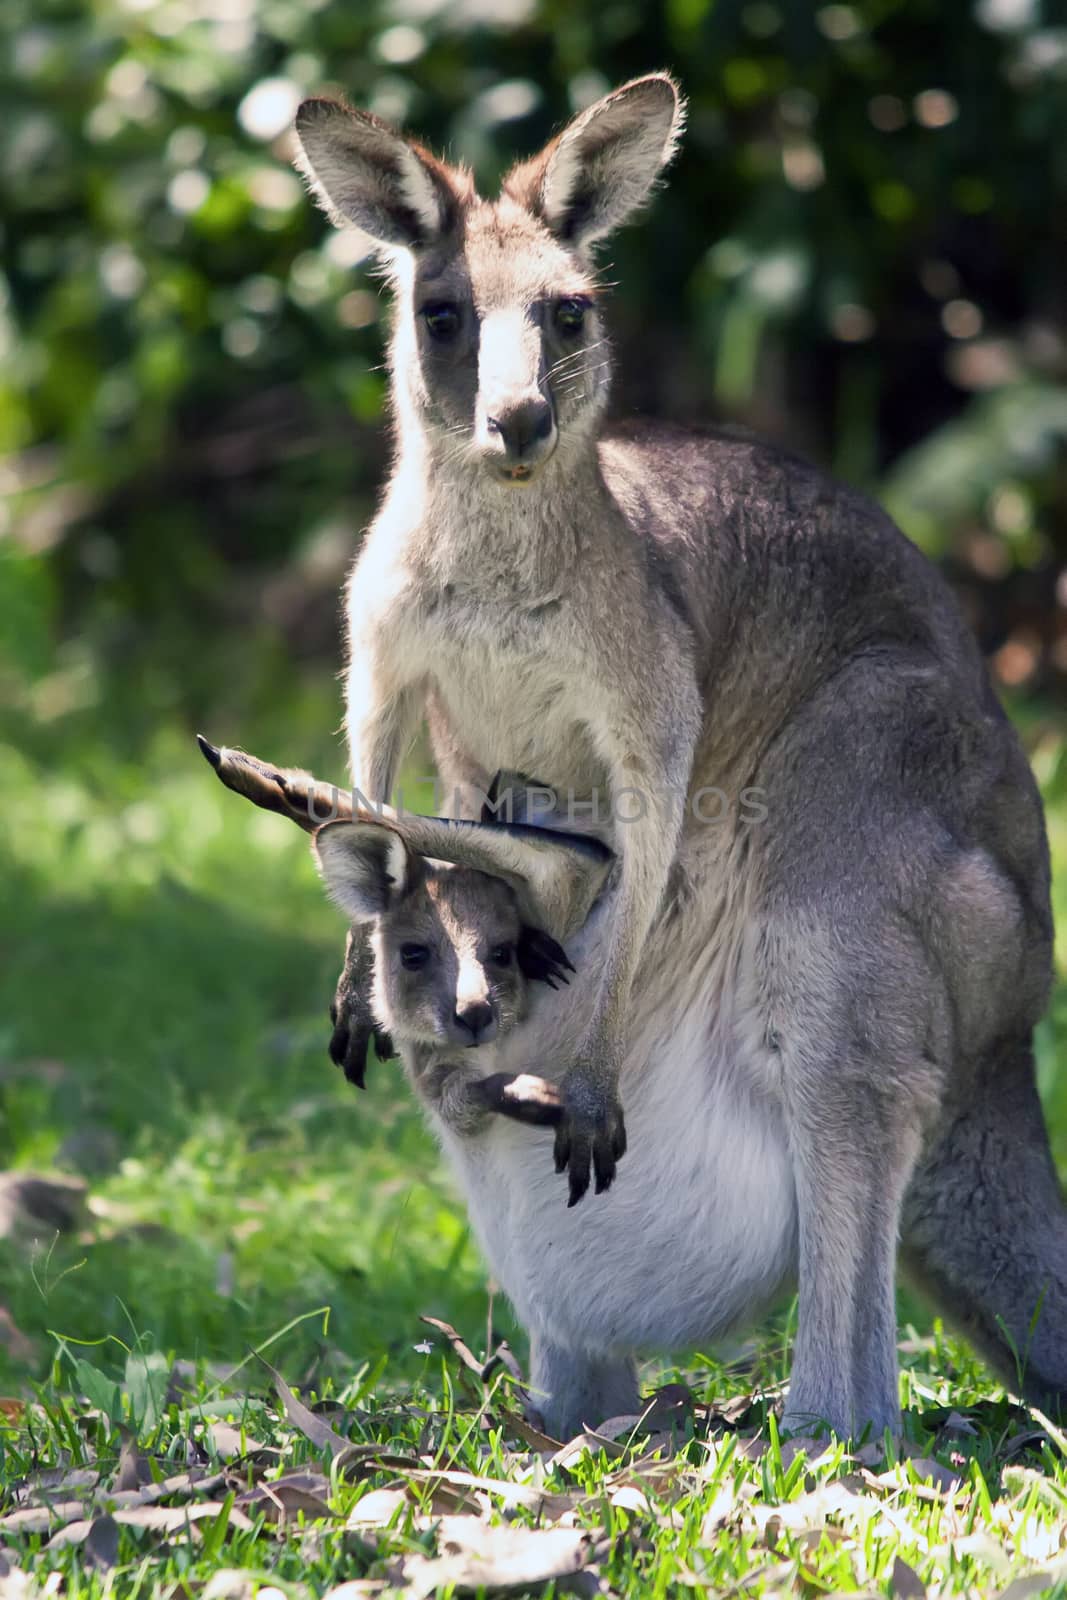 Female grey kangaroo with its cute joey in its pouch by definitearts